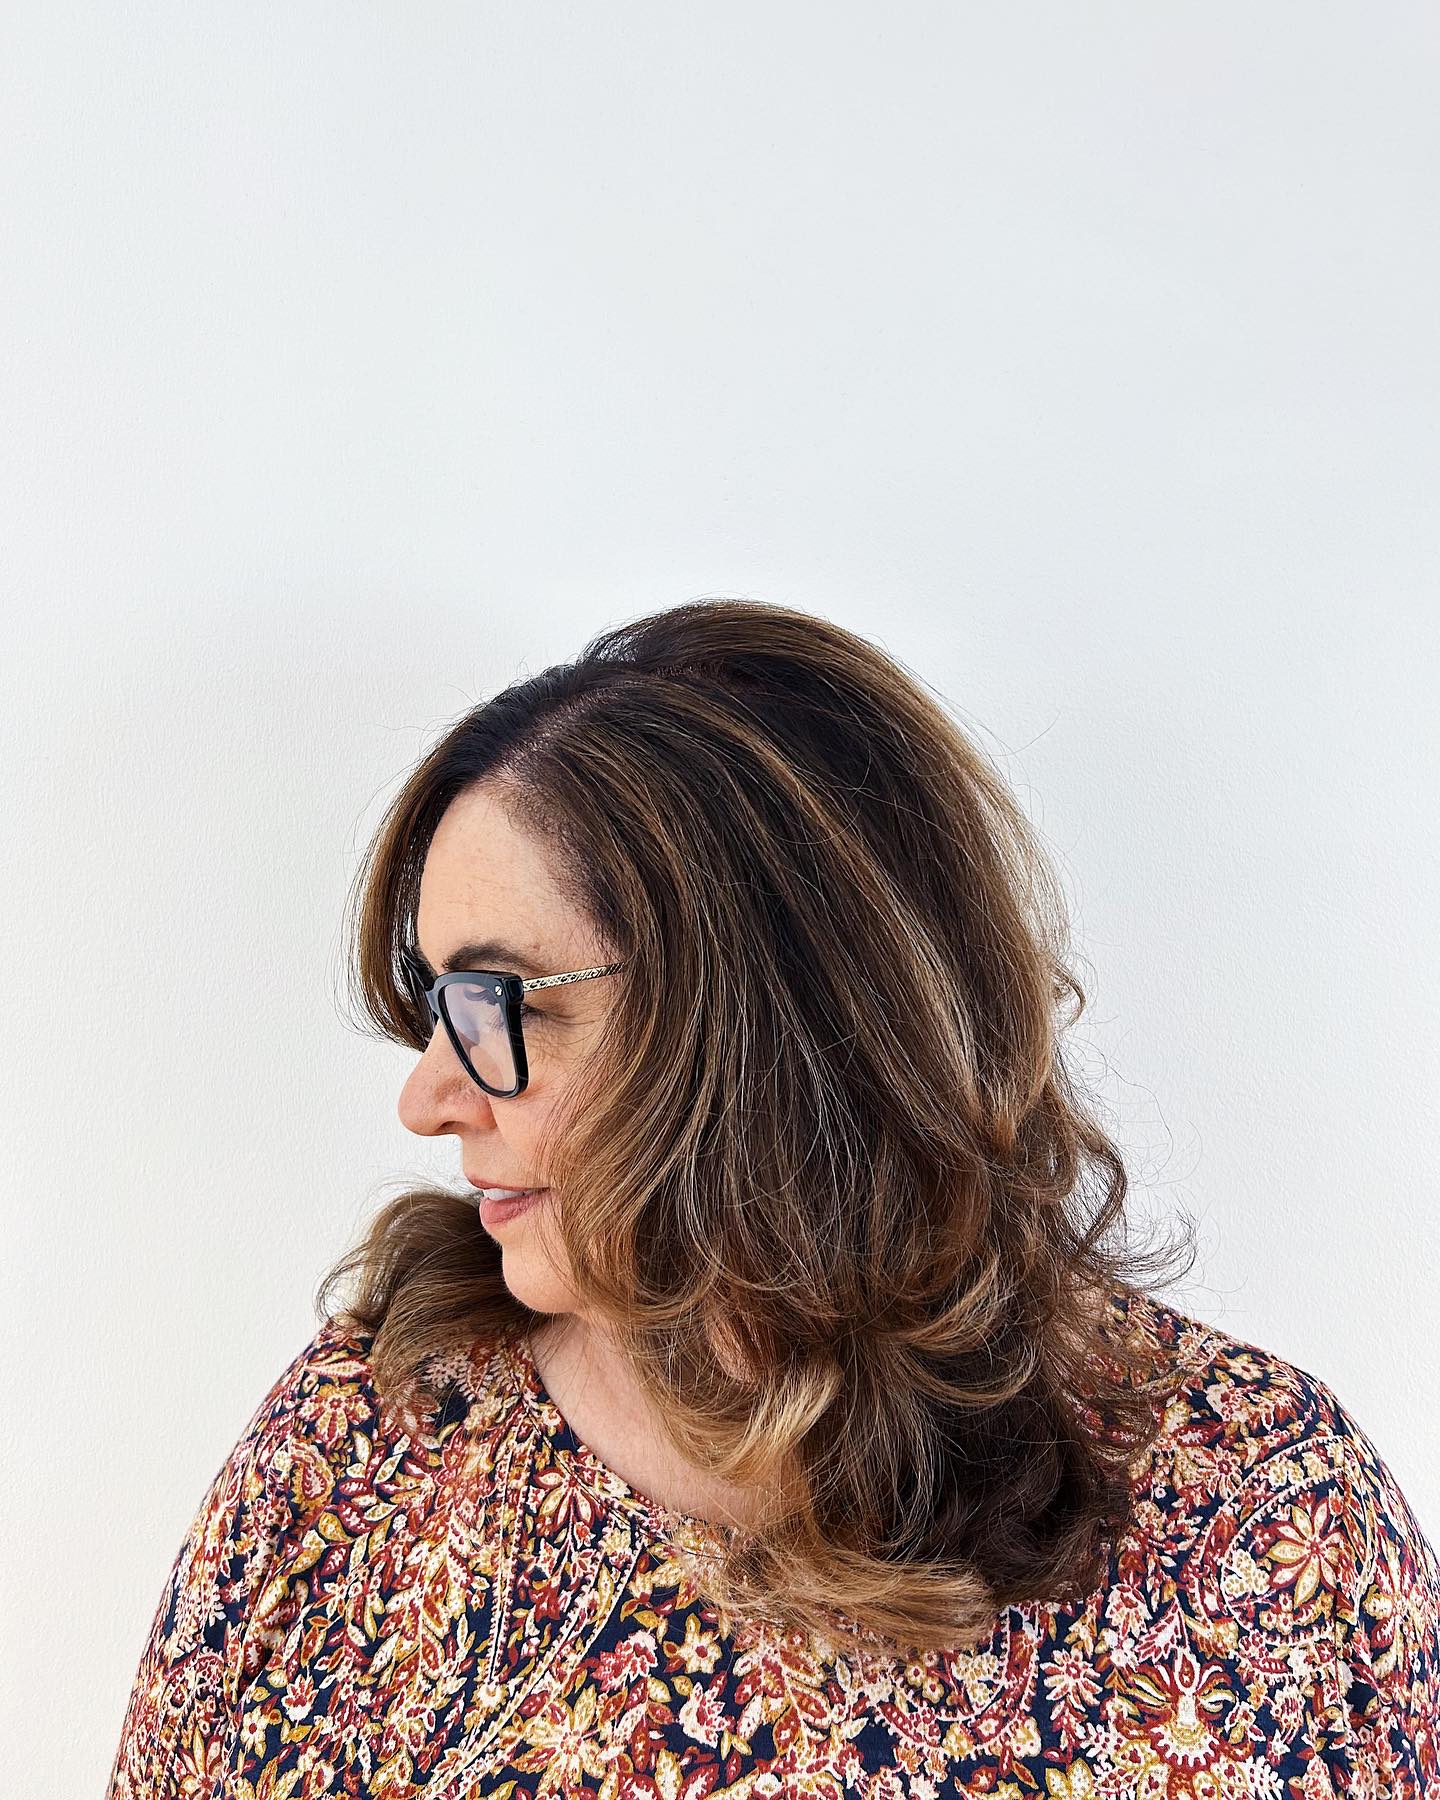 Hairstyles for medium hair: 15 options for women in their 40s